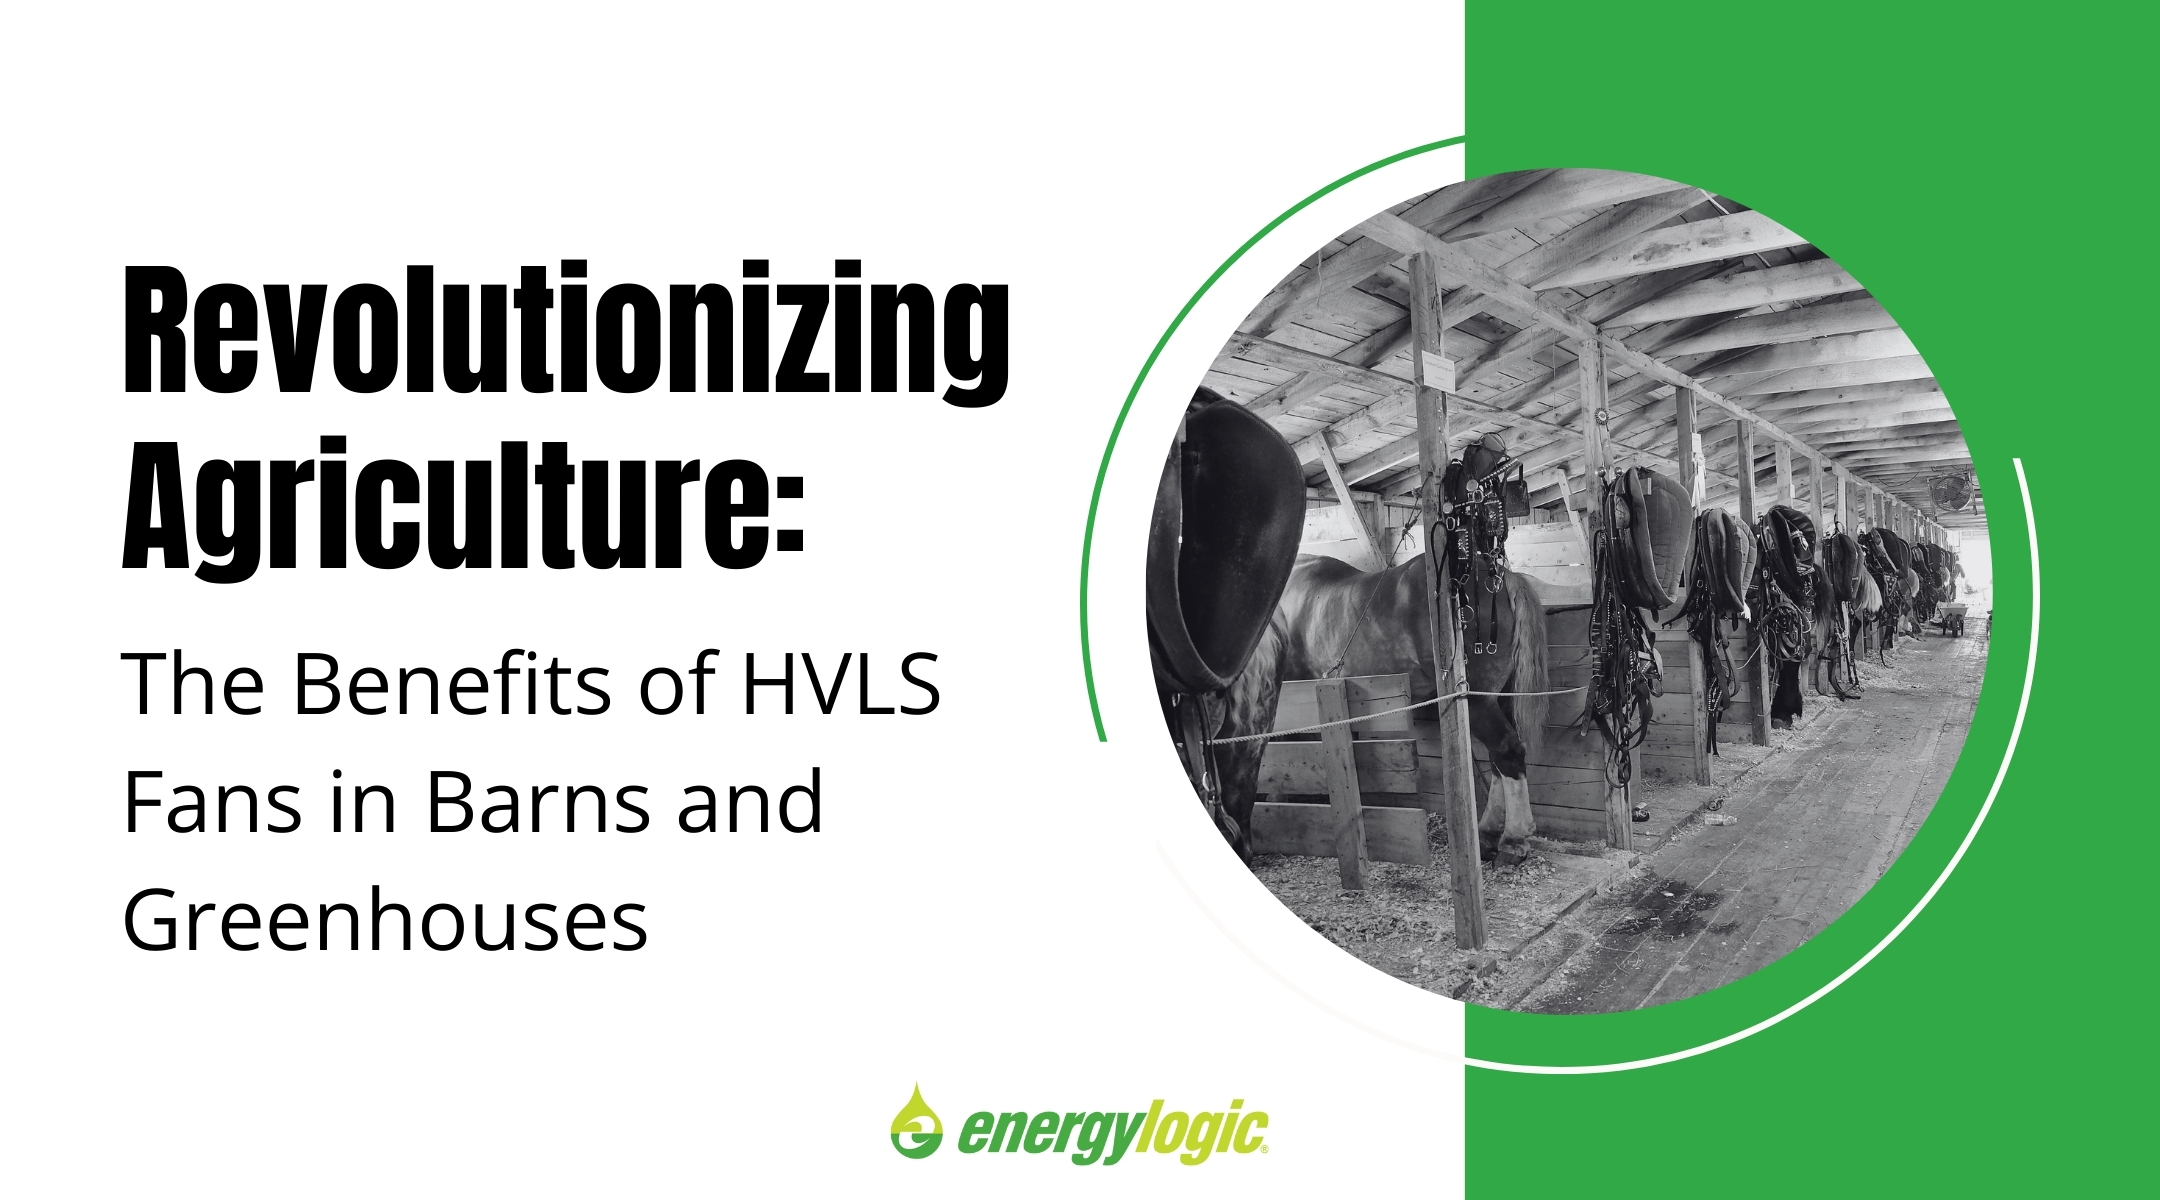 Revolutionizing Agriculture: The Benefits of HVLS Fans in Barns and Greenhouses